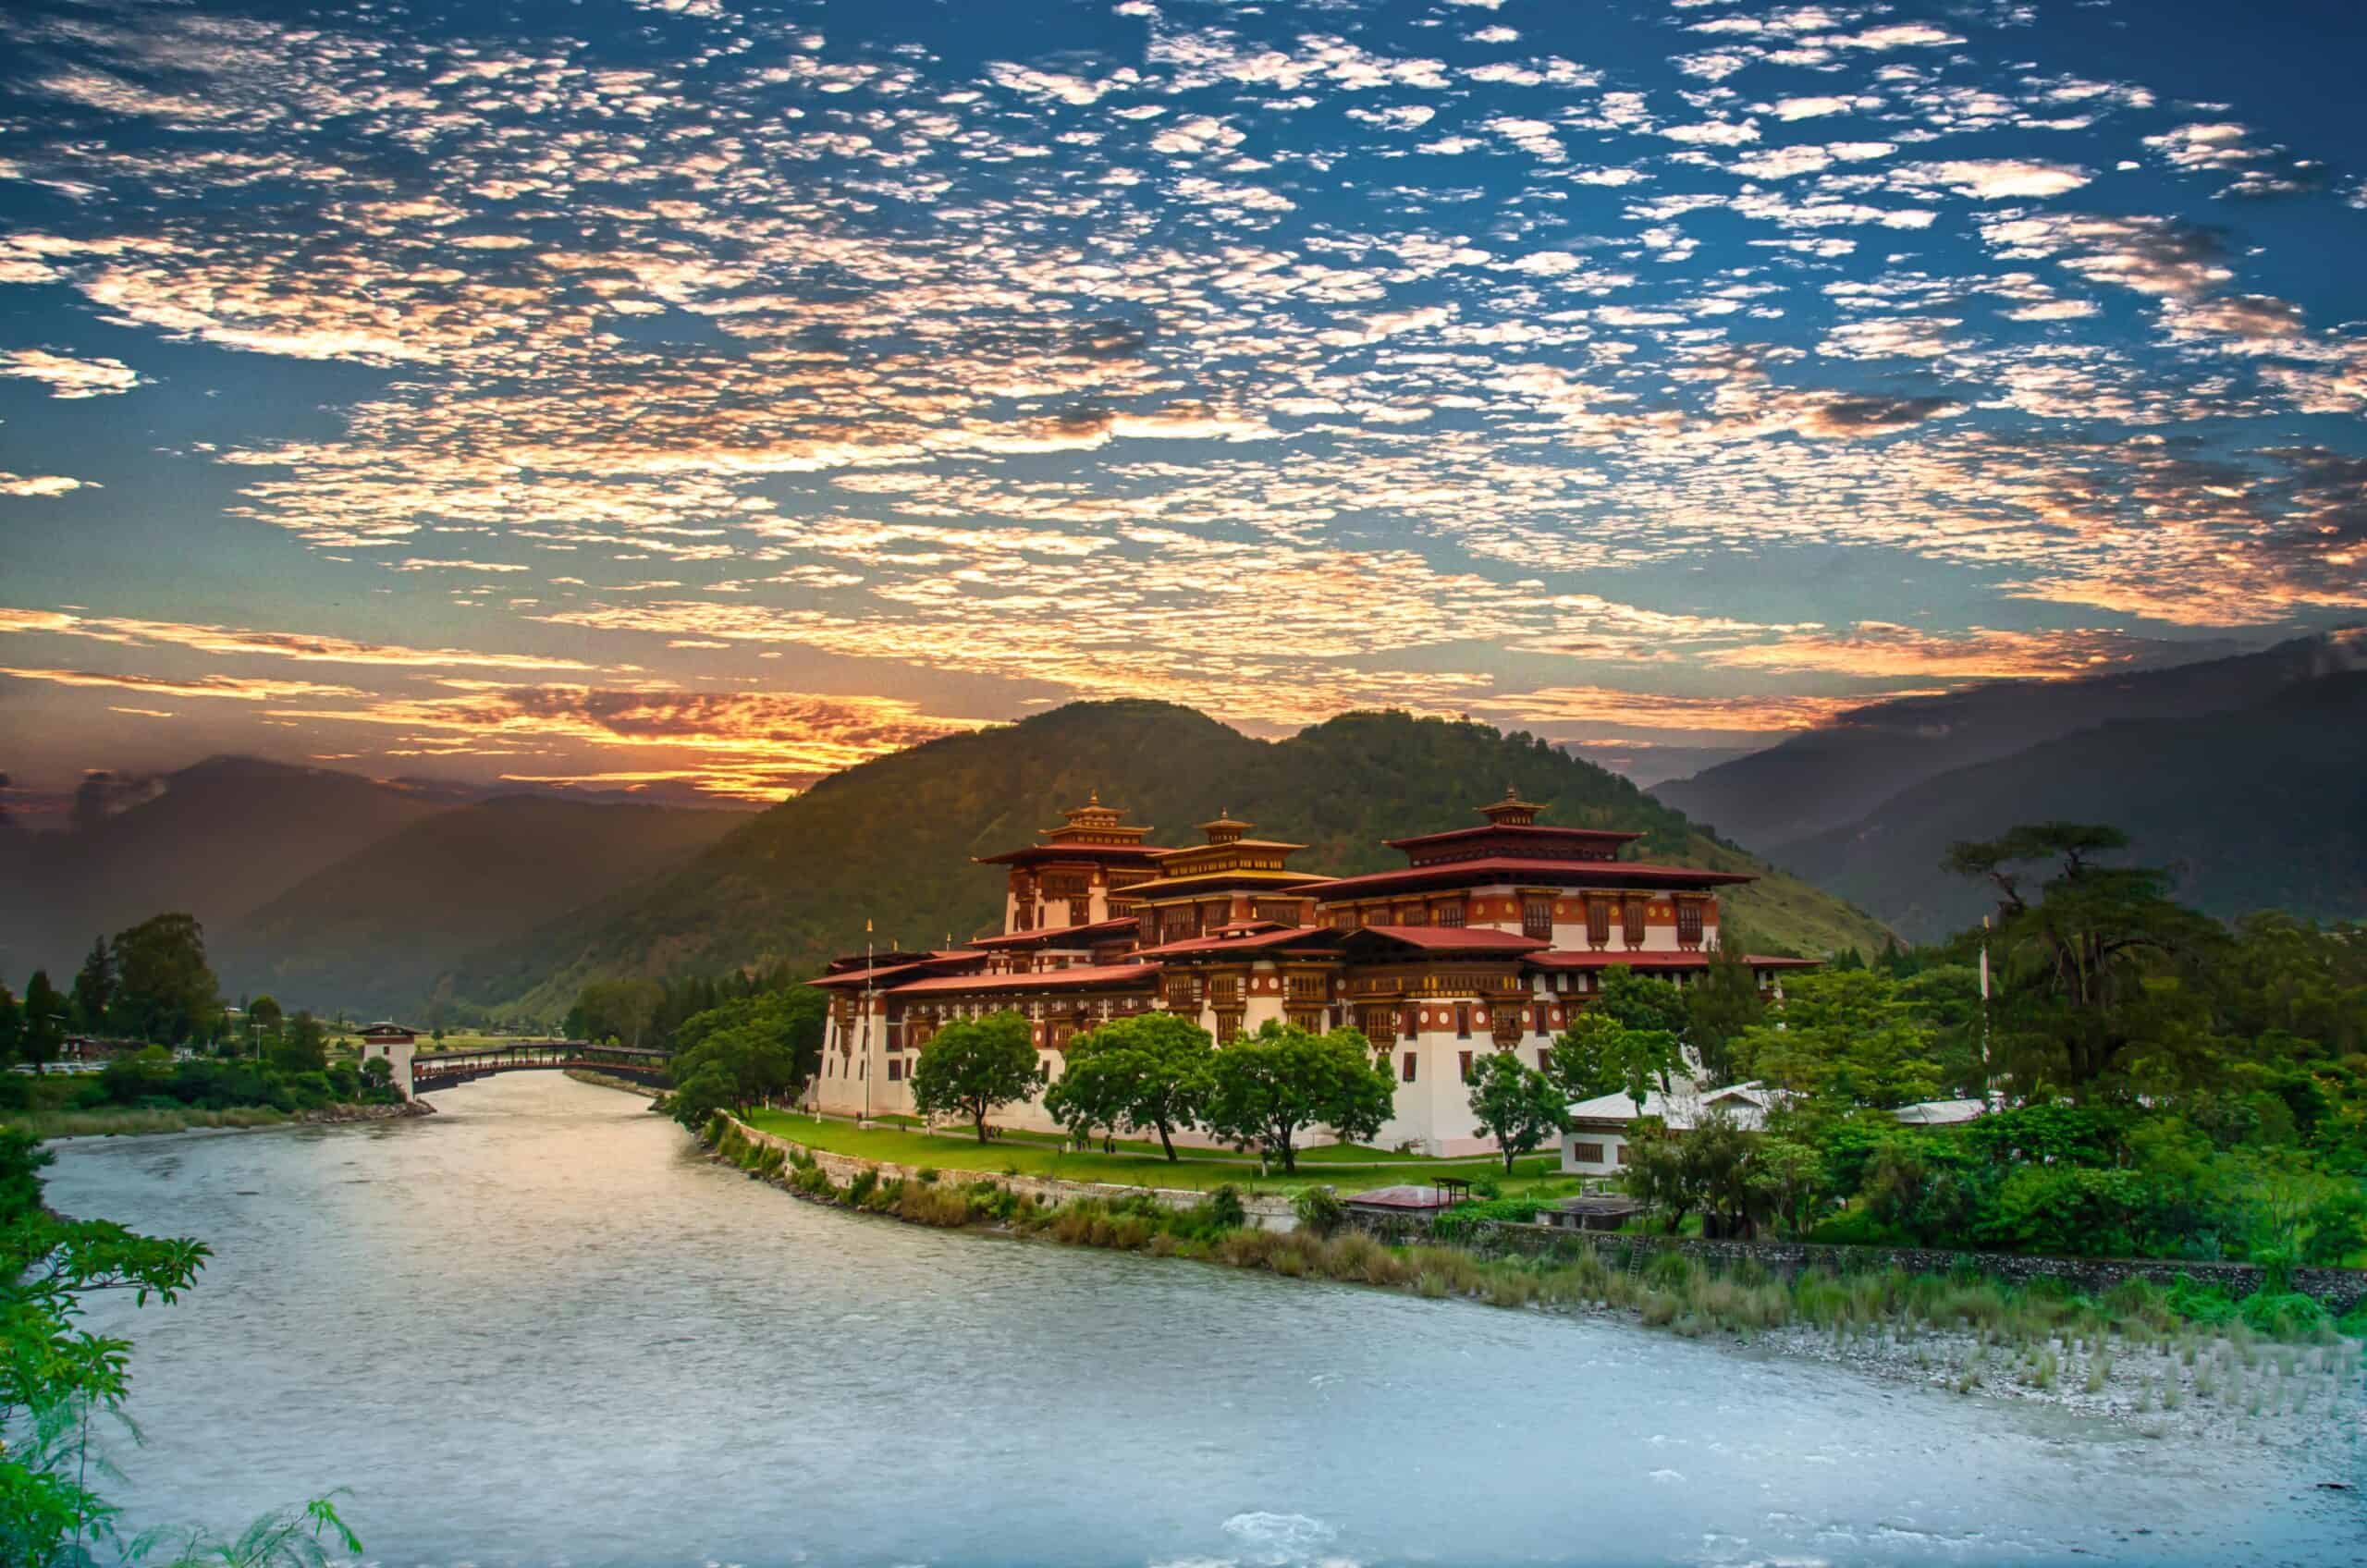 Bhutan | A glorious evening in Punakha, Bhutan. Bhutan is also known as the land of the thunder dragon.